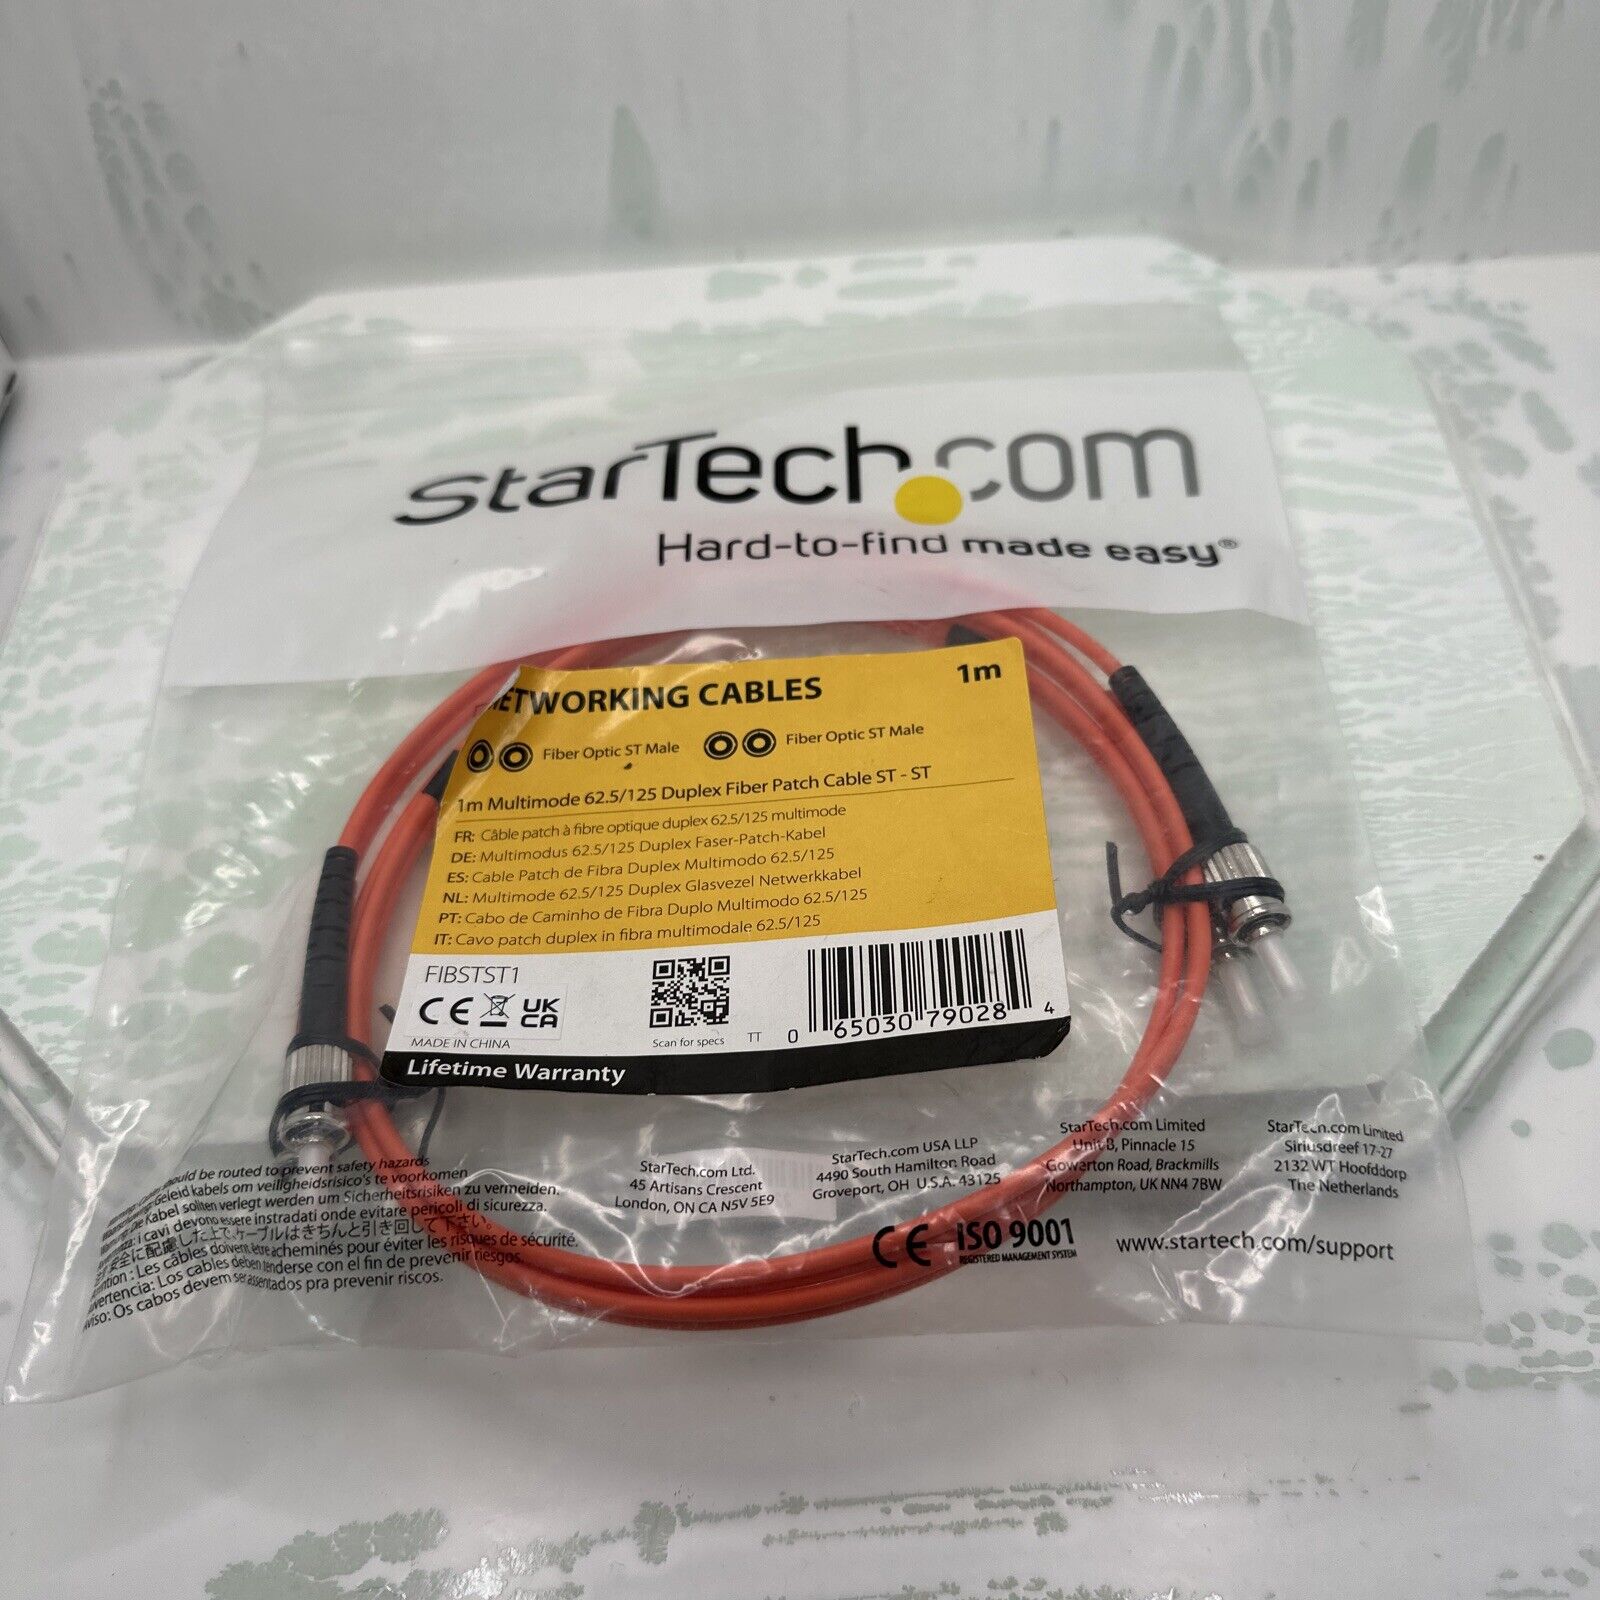 Startech.com Fiber Optic Patch Cable - 2 X St Male Network - 2 X St Male Network